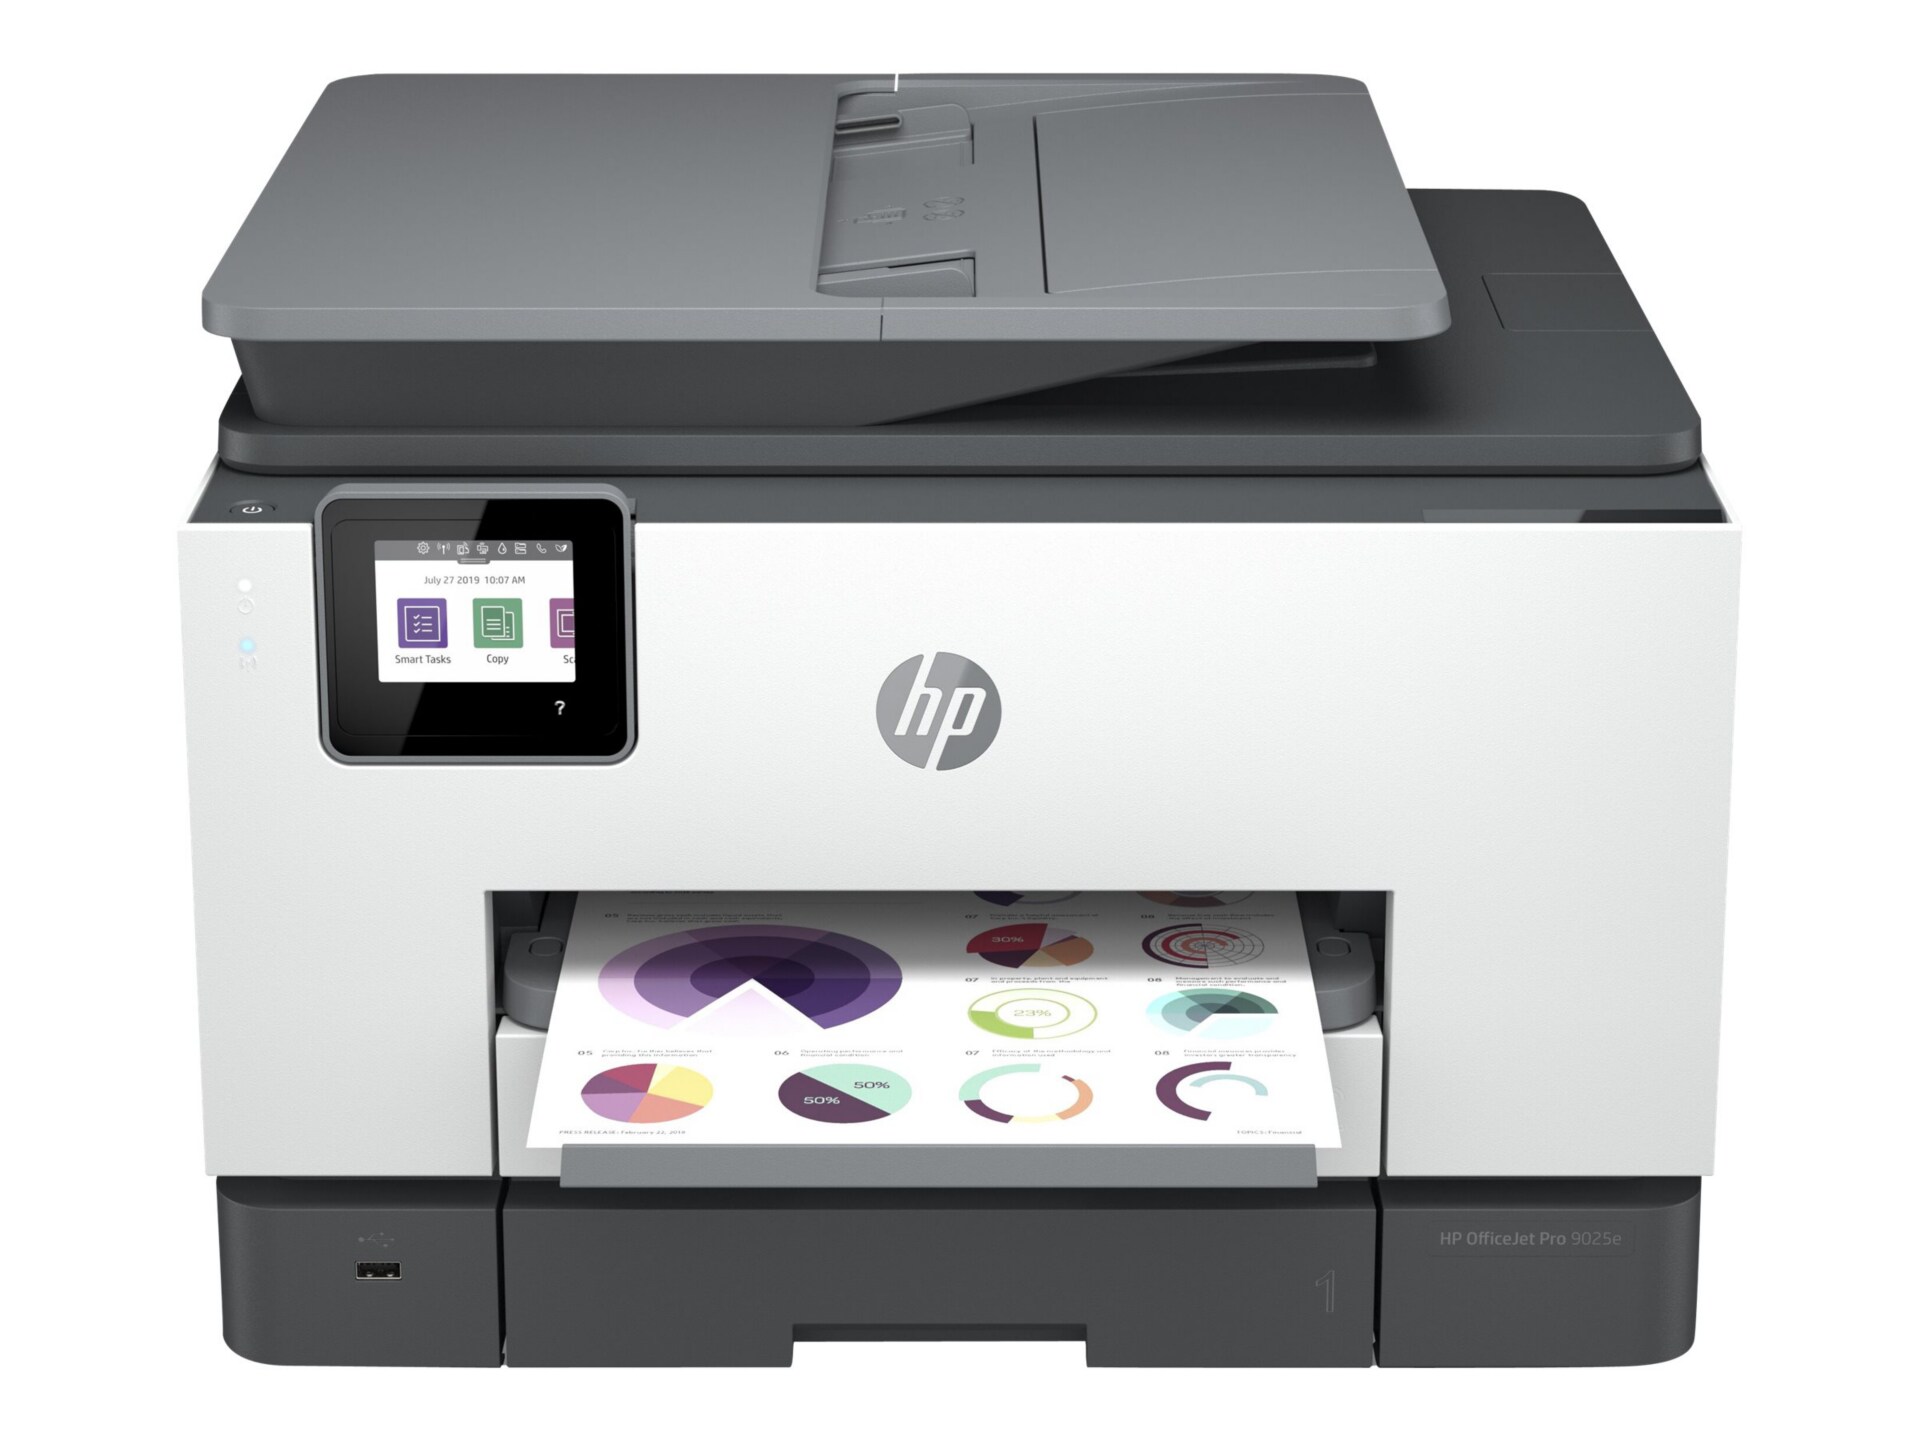 HP Officejet Pro 9025e All-in-One printer